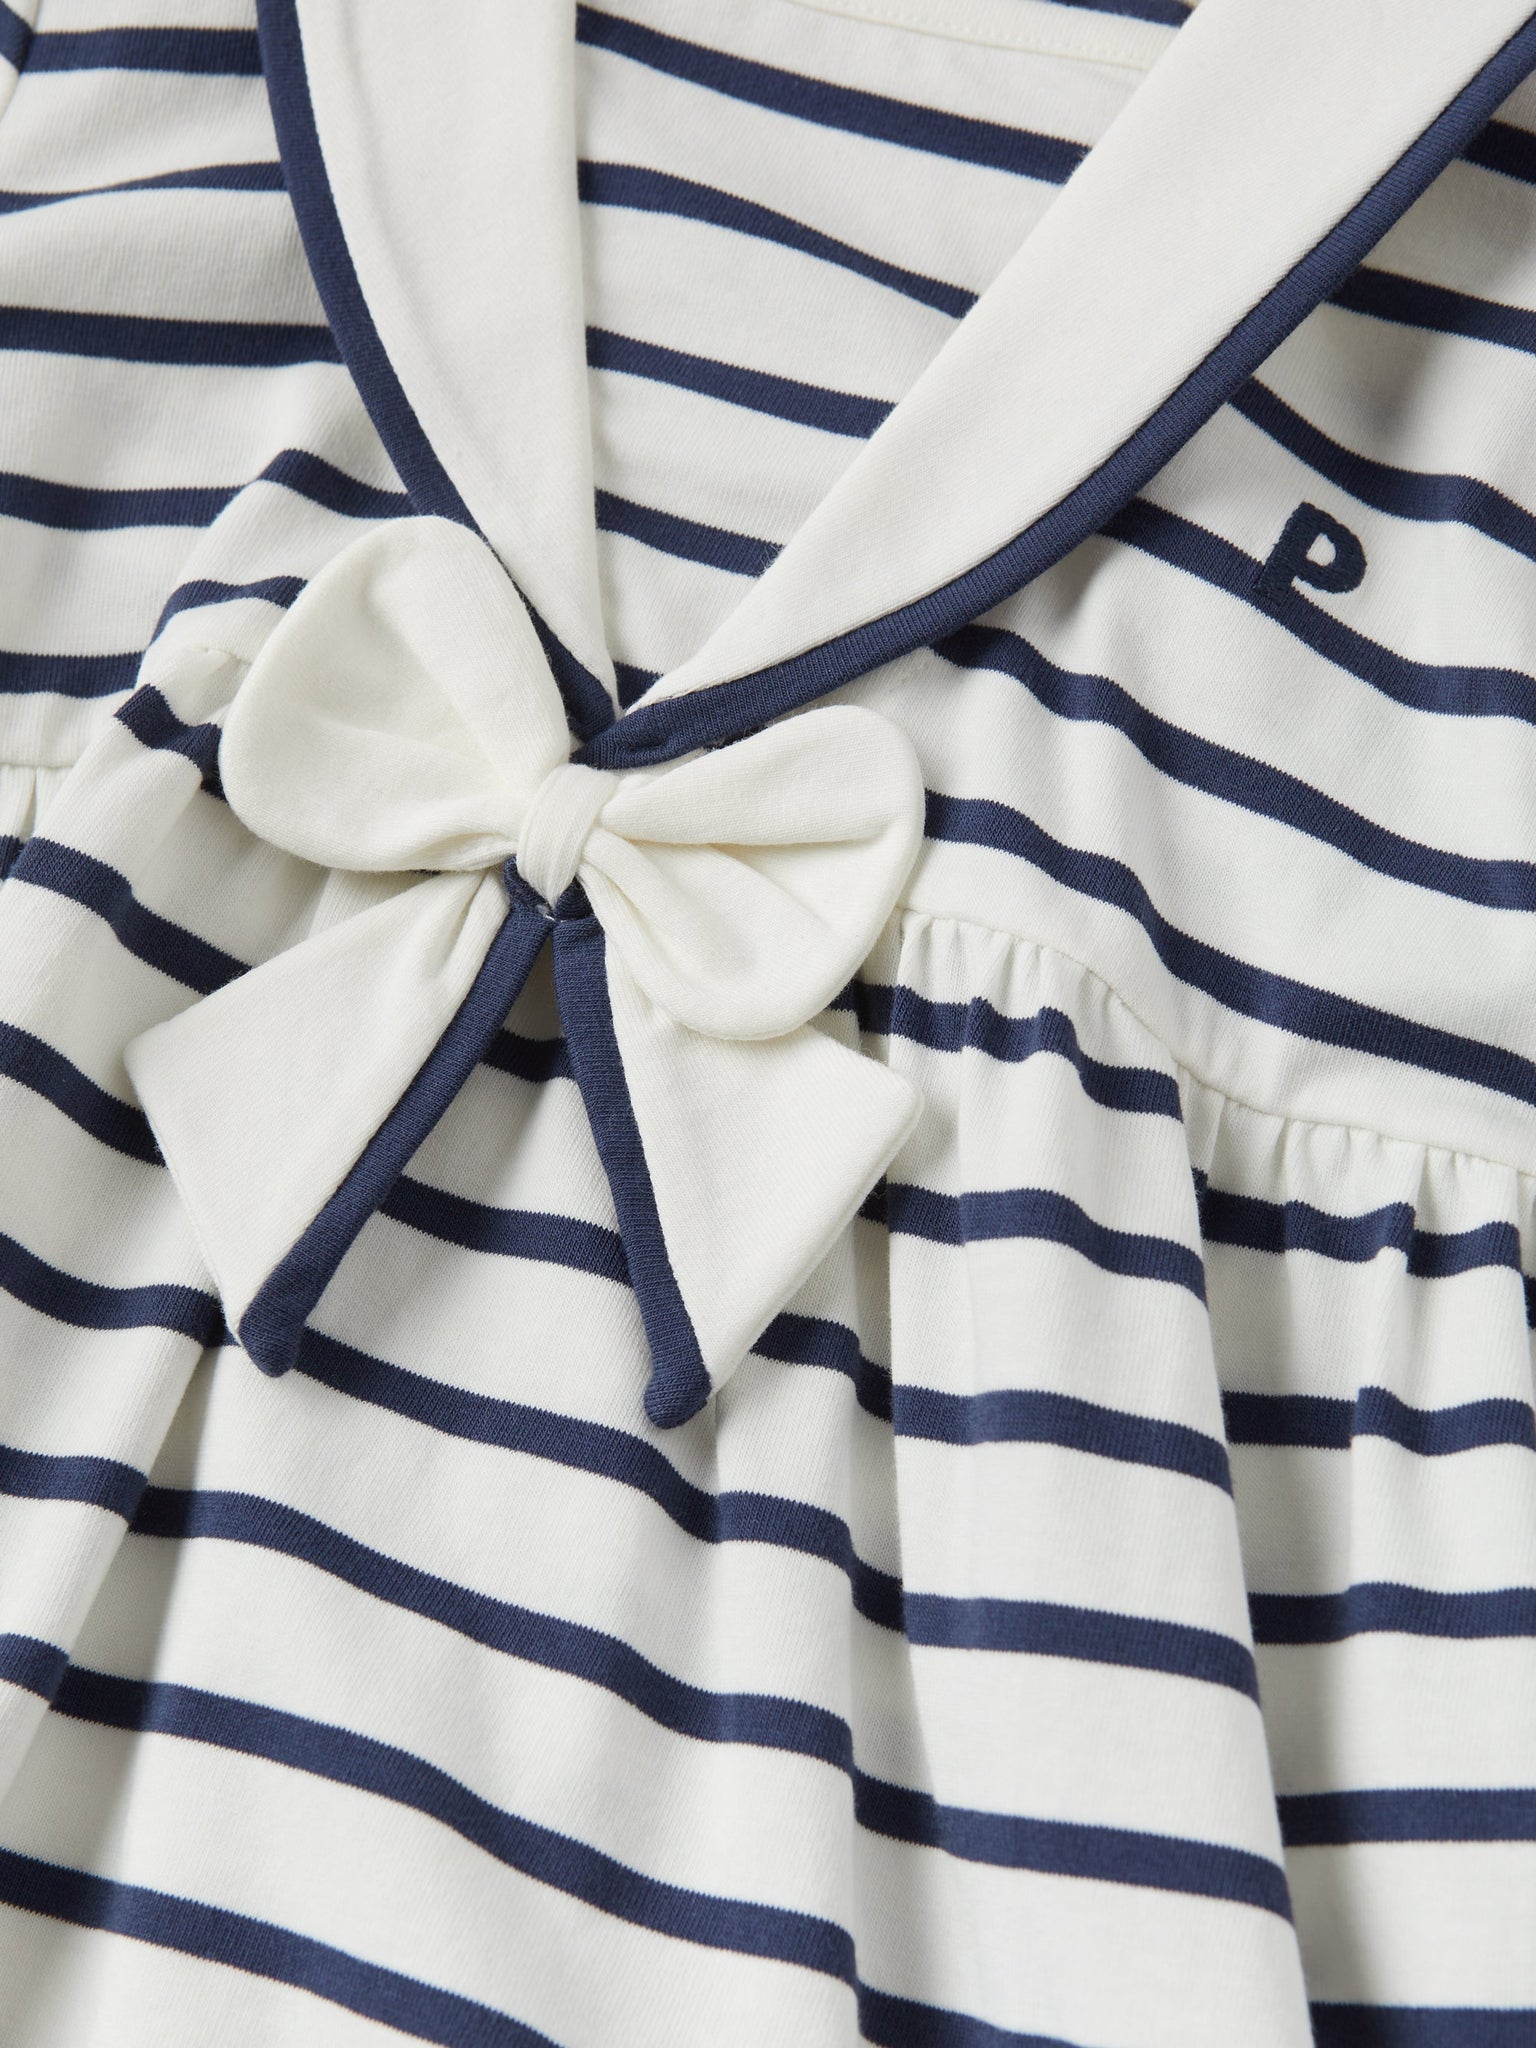 Organic Cotton Striped Baby Sailor Dress from the Polarn O. Pyret baby collection. Clothes made using sustainably sourced materials.